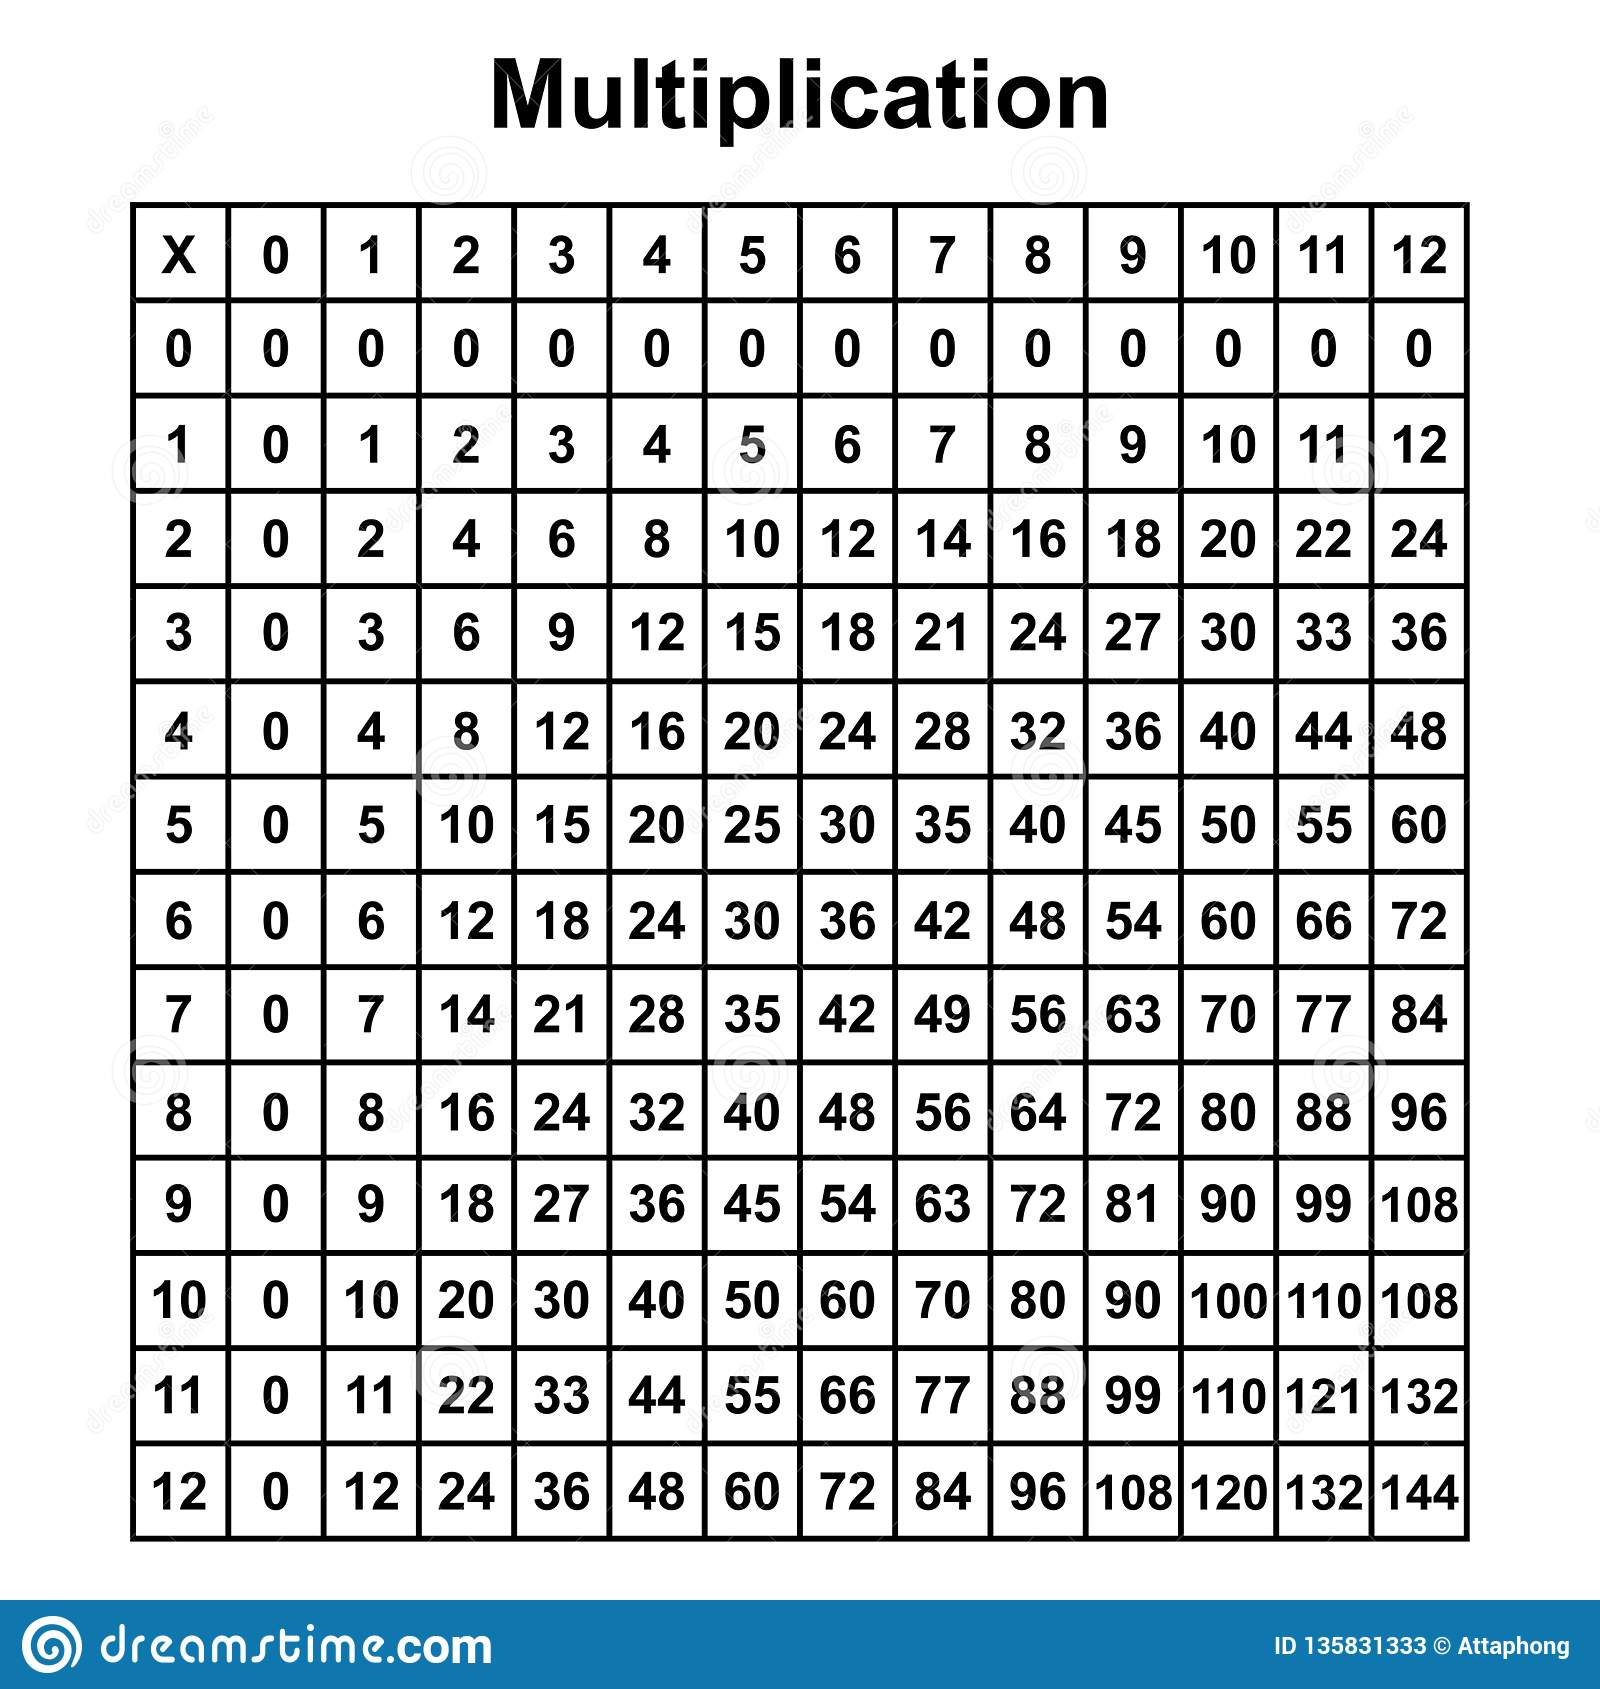 Multiplication Table Chart Or Multiplication Table Printable